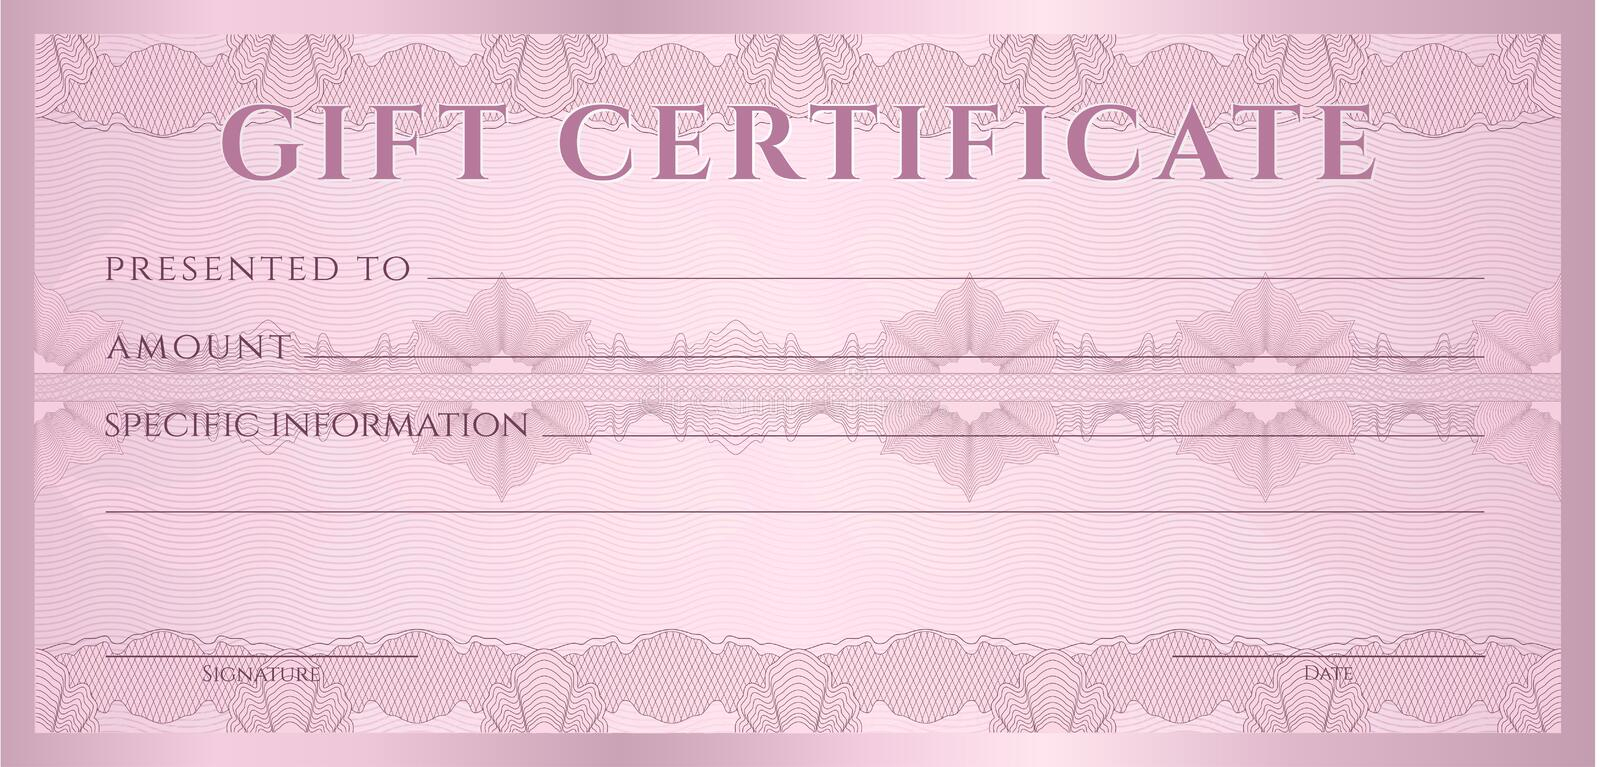 Gift Certificate (Voucher, Coupon) Template Stock Vector  Inside Pink Gift Certificate Template